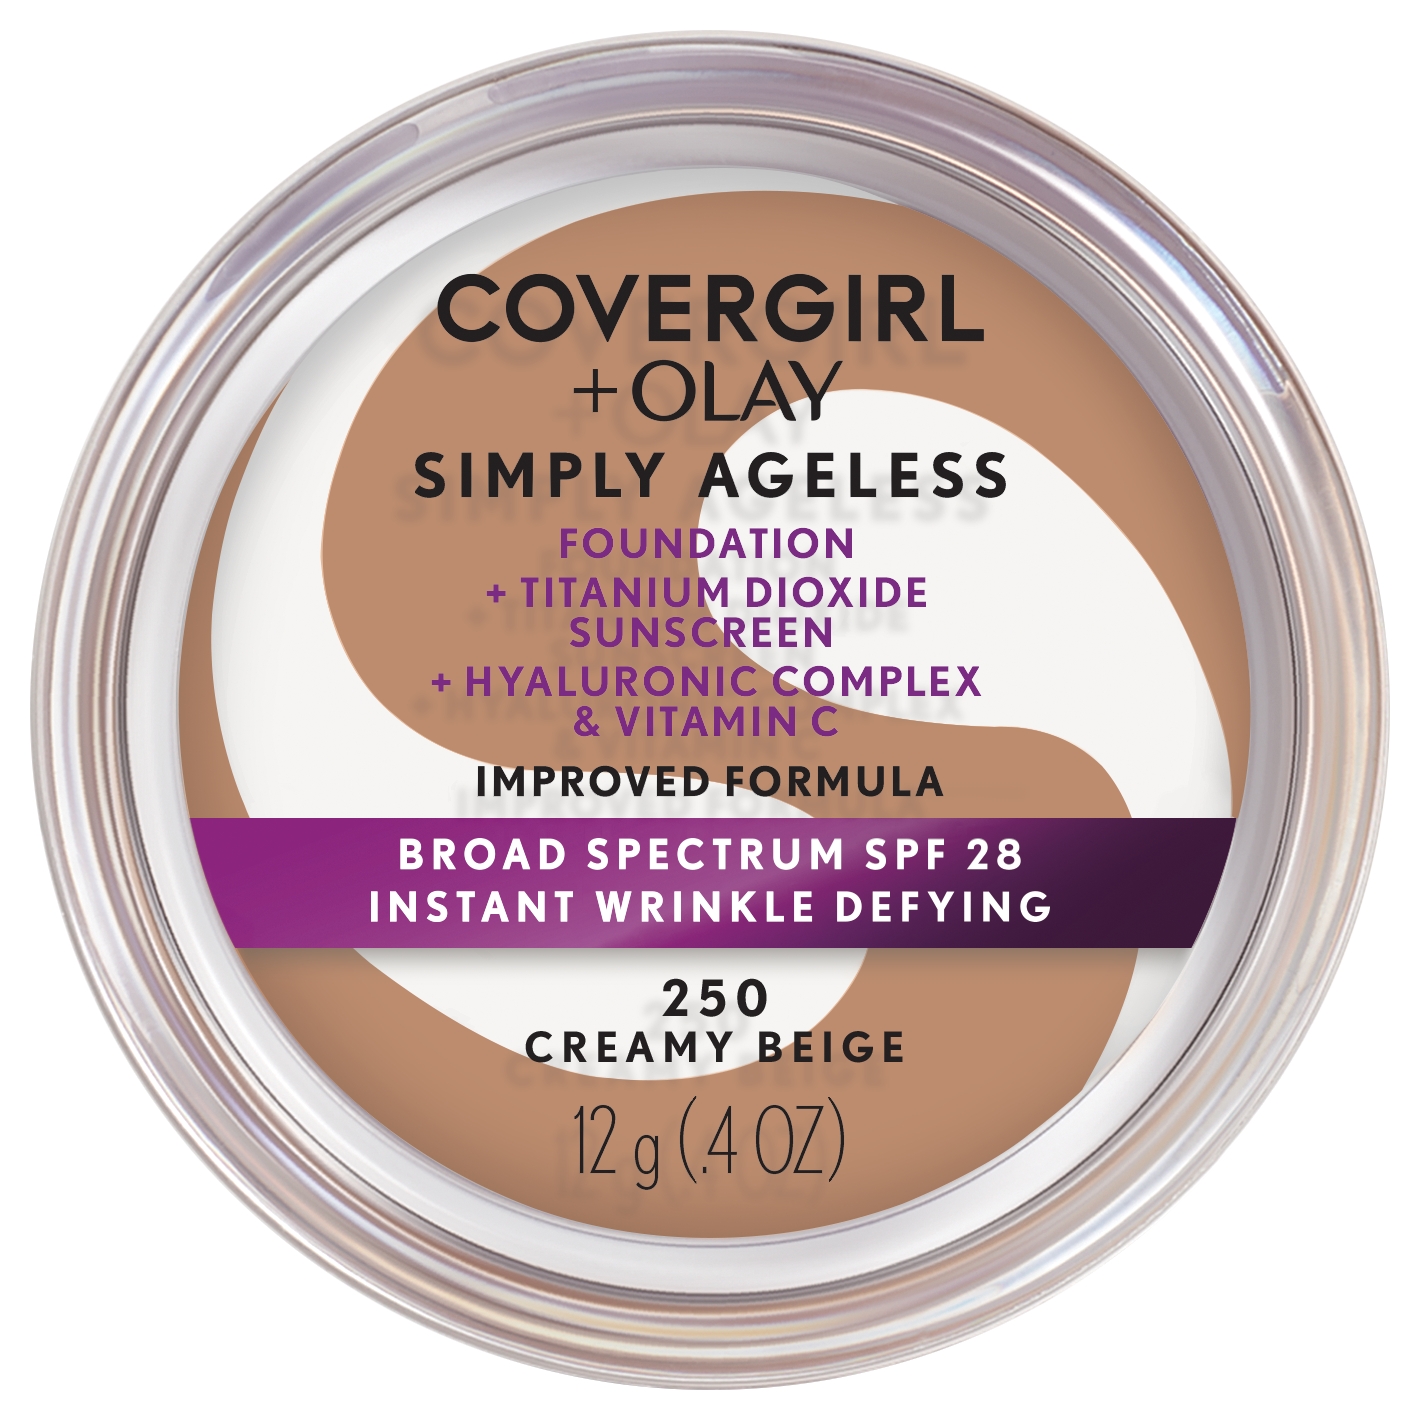 COVERGIRL + OLAY Simply Ageless Instant Wrinkle-Defying Foundation with SPF 28, Creamy Beige, 0.44 oz - image 1 of 9